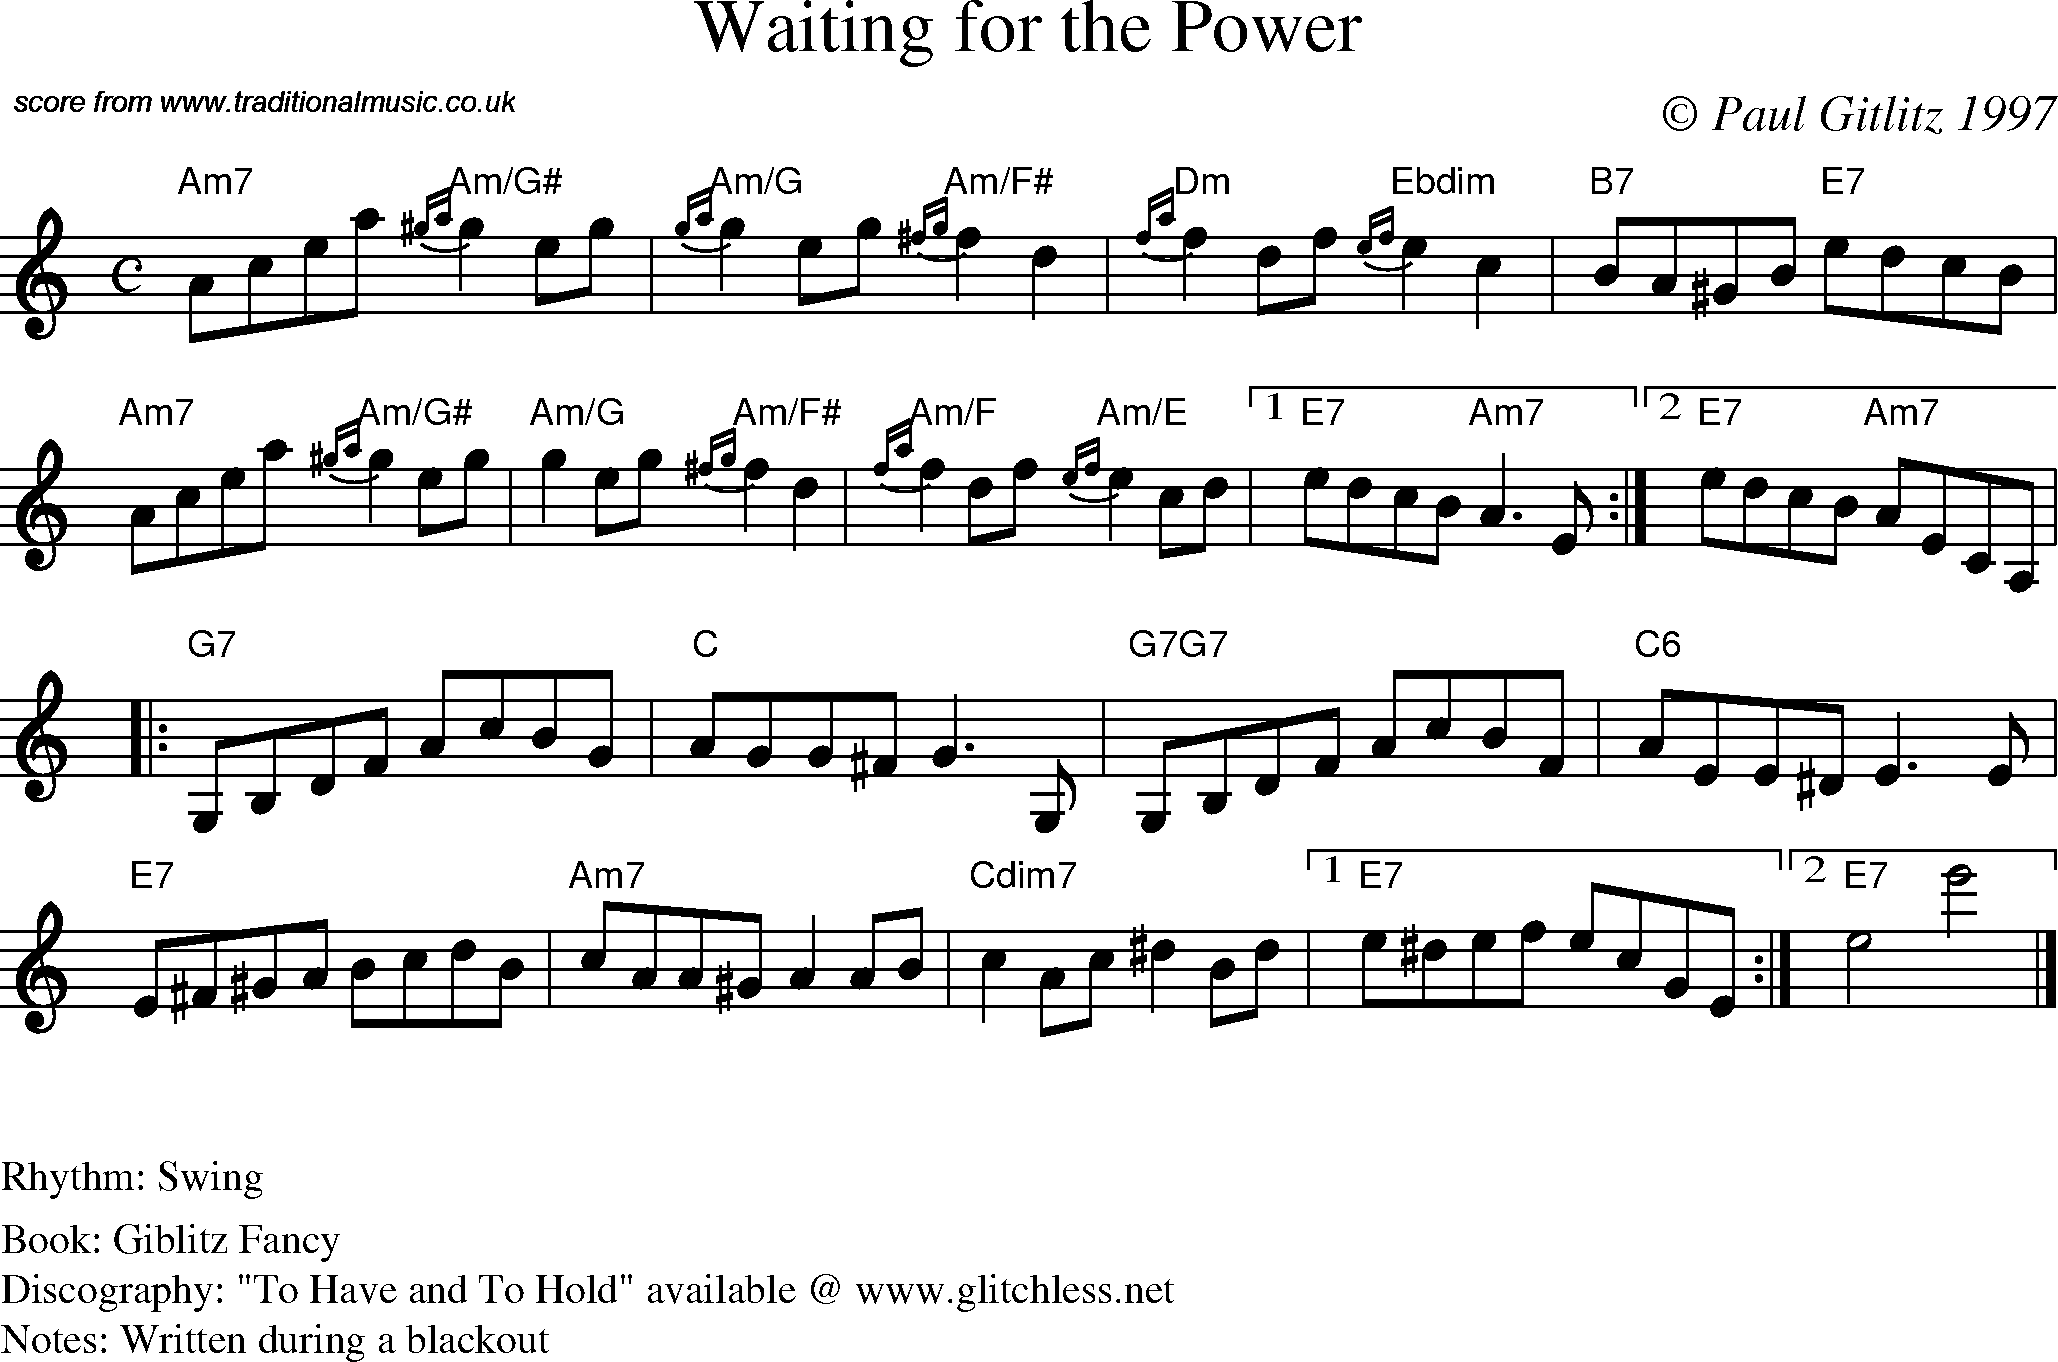 Sheet Music Score for Swing - Waiting for the Power